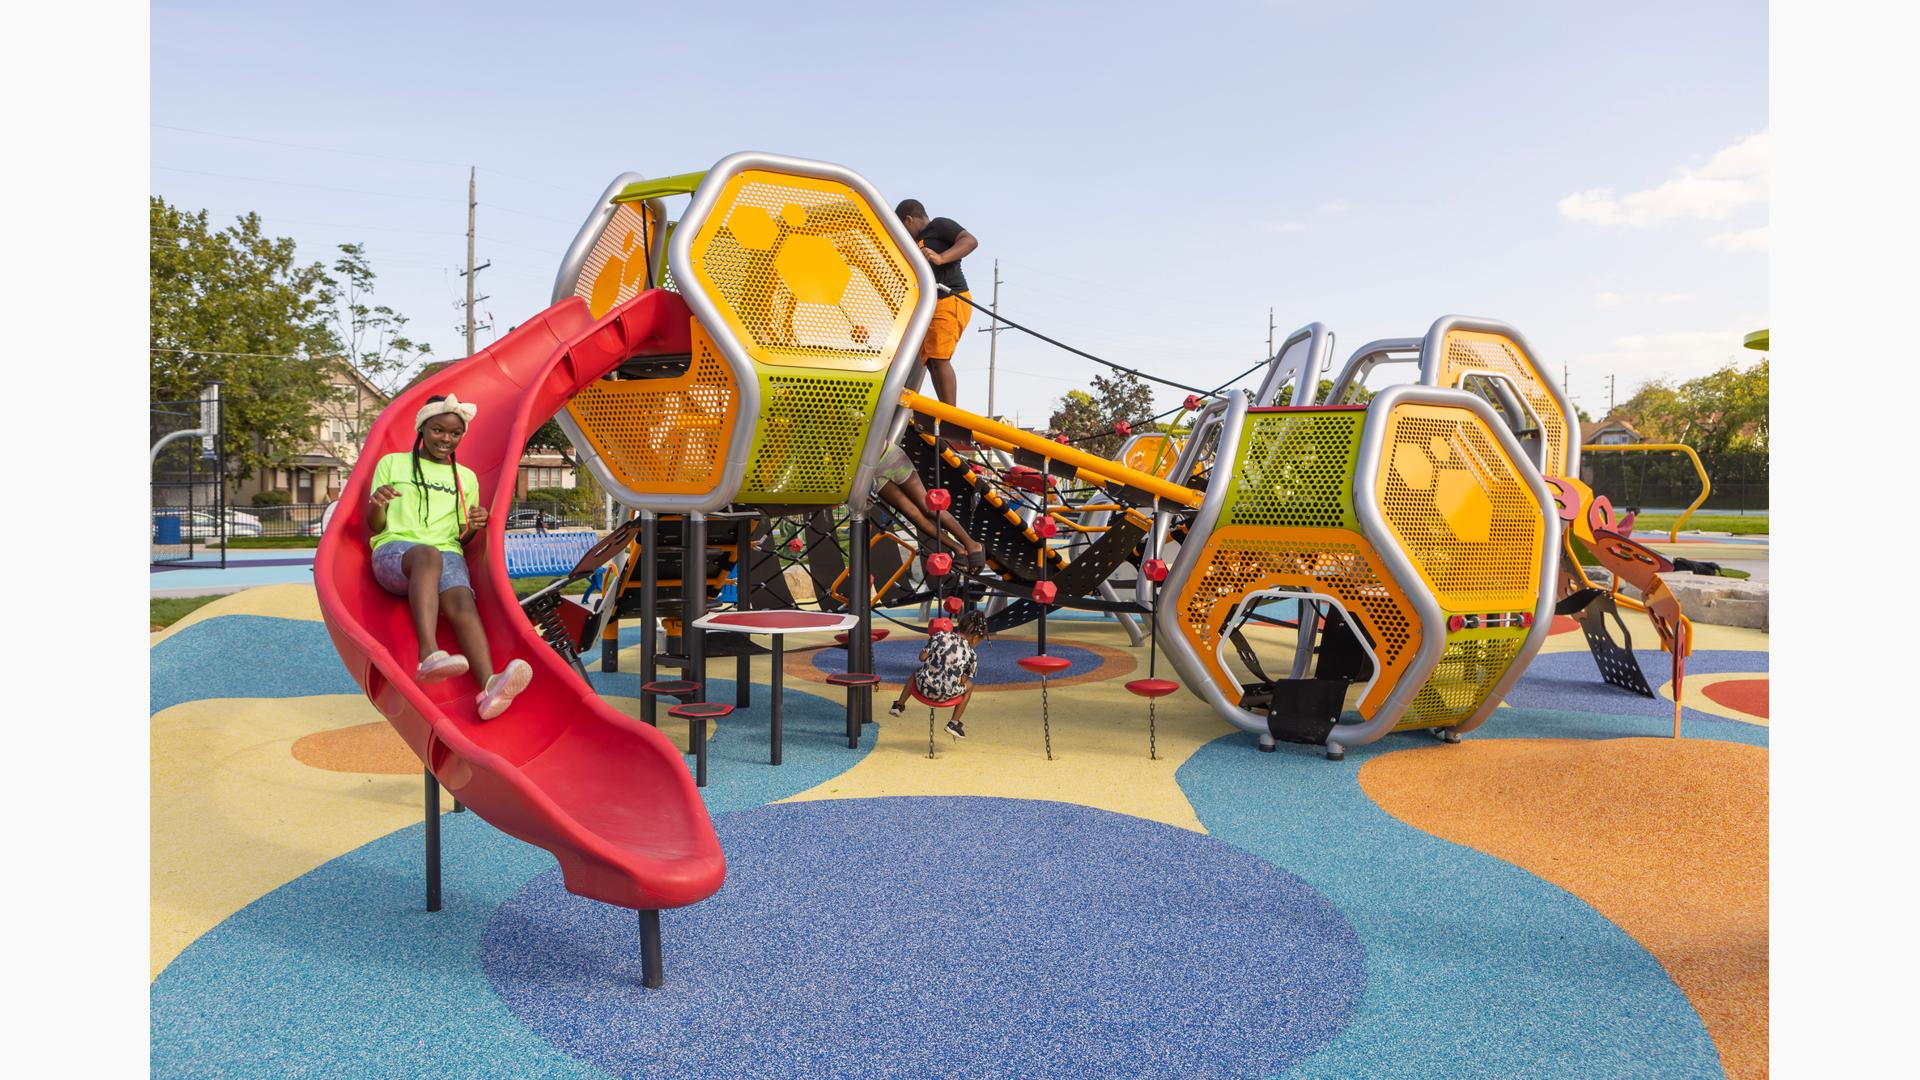 Green Bay Playfield - Colorful Geometric Playground Design!